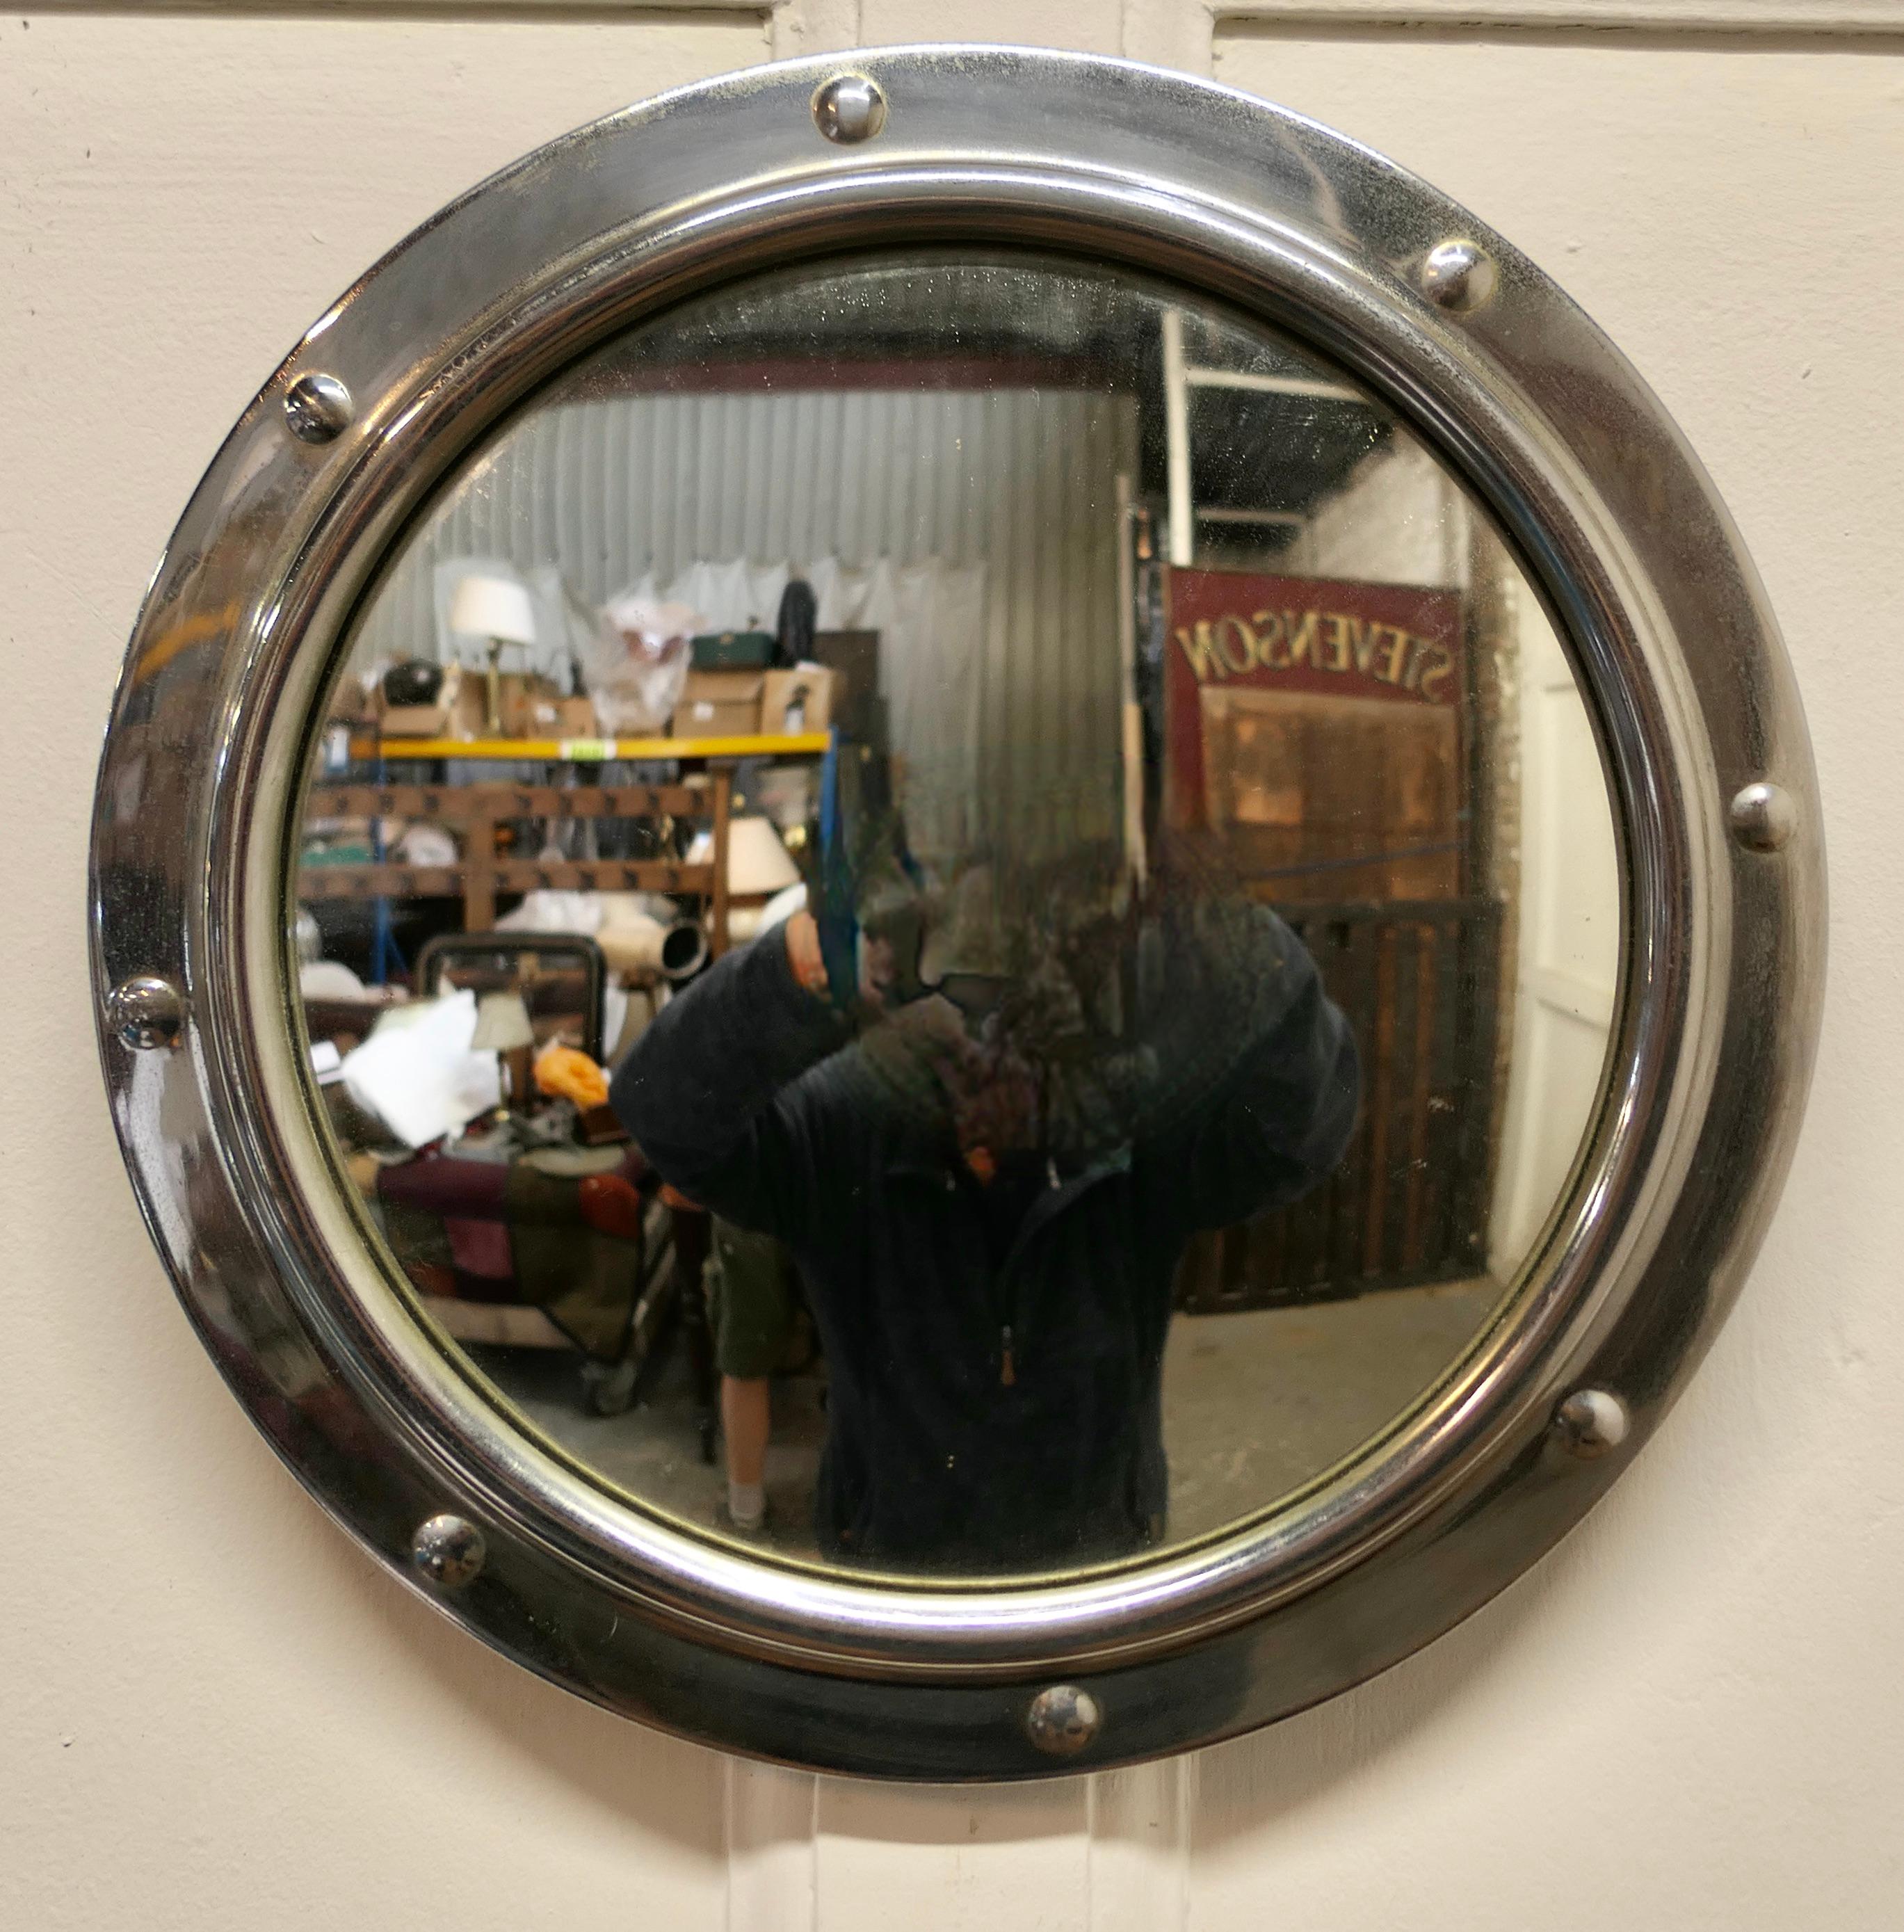 Chrome Convex Wall Mirror 

This is an attractive Mirror has a 1.5” wide with simulated rivets giving it a nautical look and has a convex looking glass  
The mirror is in good condition as is the original convex looking glass

The mirror is 12” in